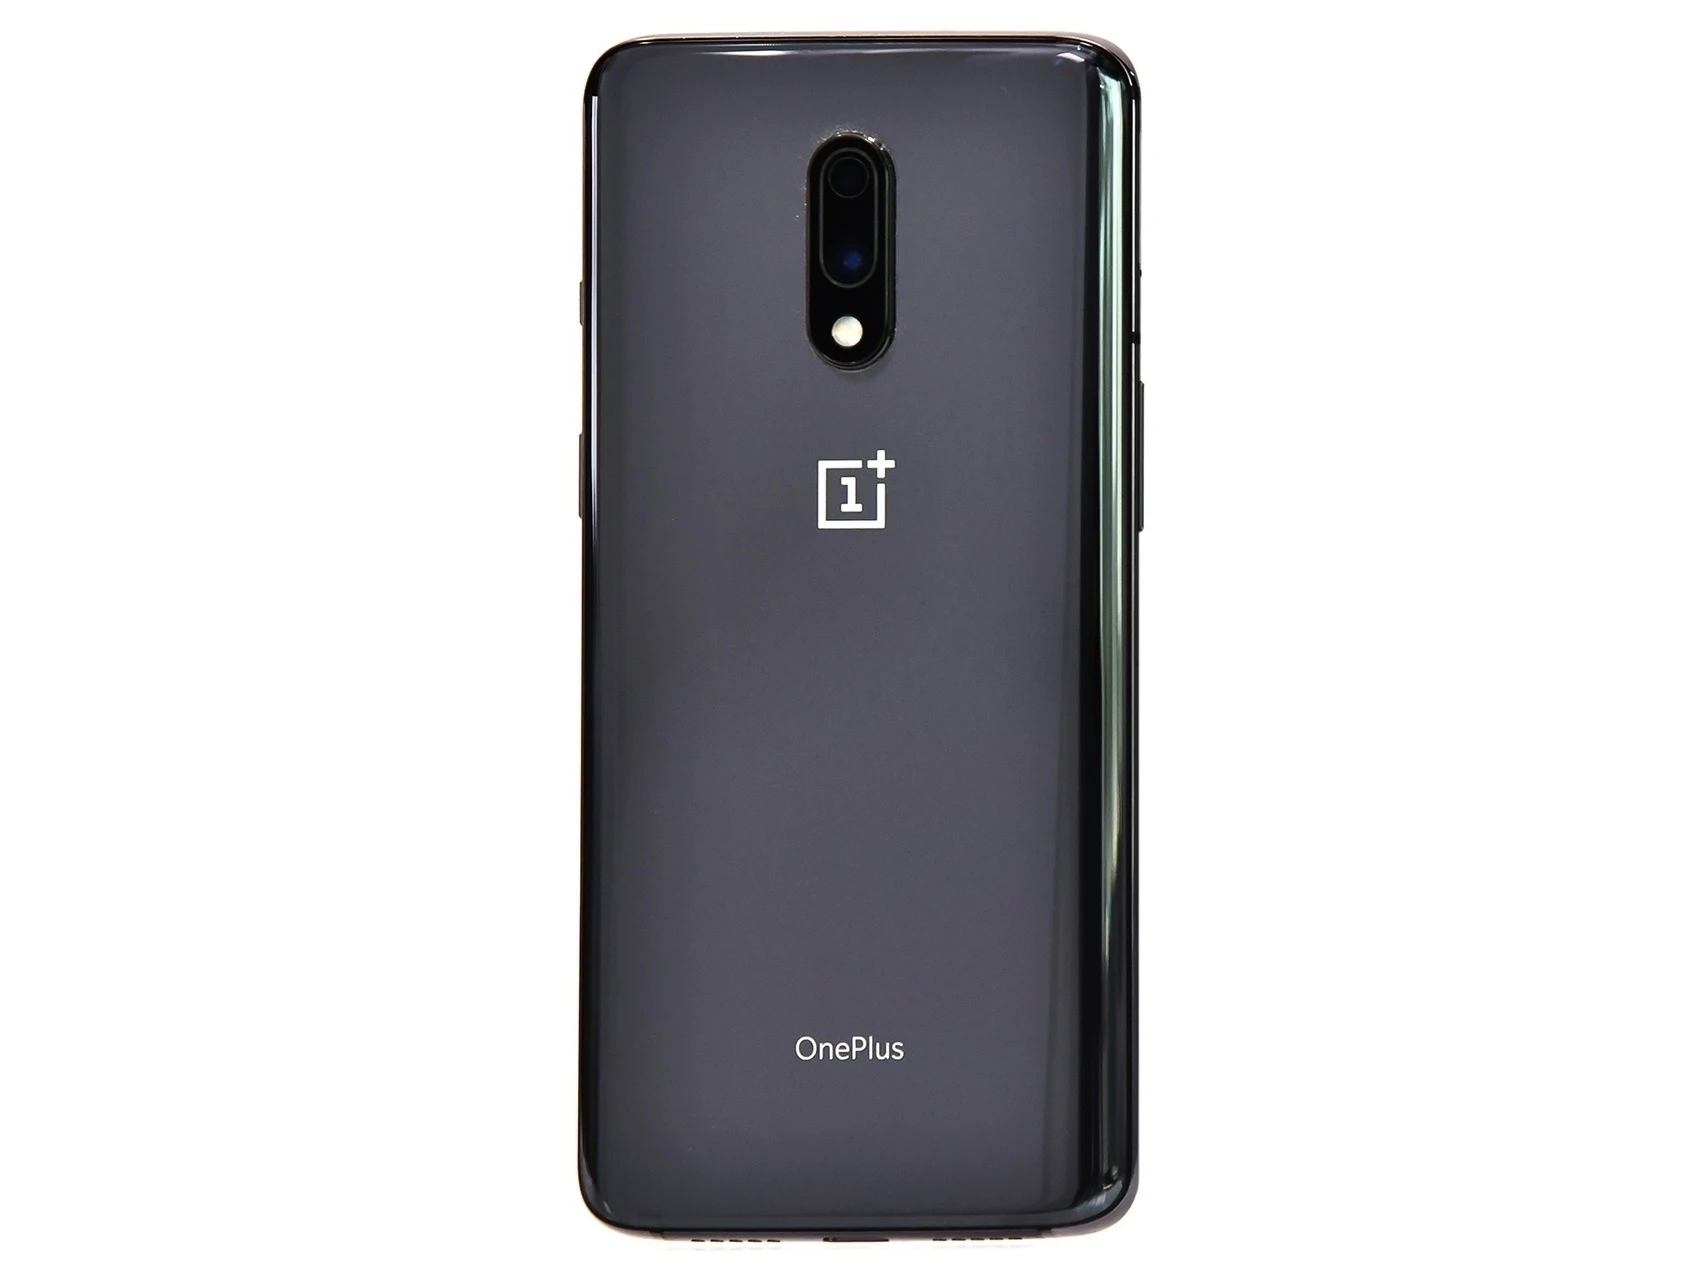 New Original Oneplus 7 Mobile Phone Global Rom 6.41" AMOLED Display Octa Core Snapdragon 855 NFC 1080x2340 pixels Telephone best oneplus nord